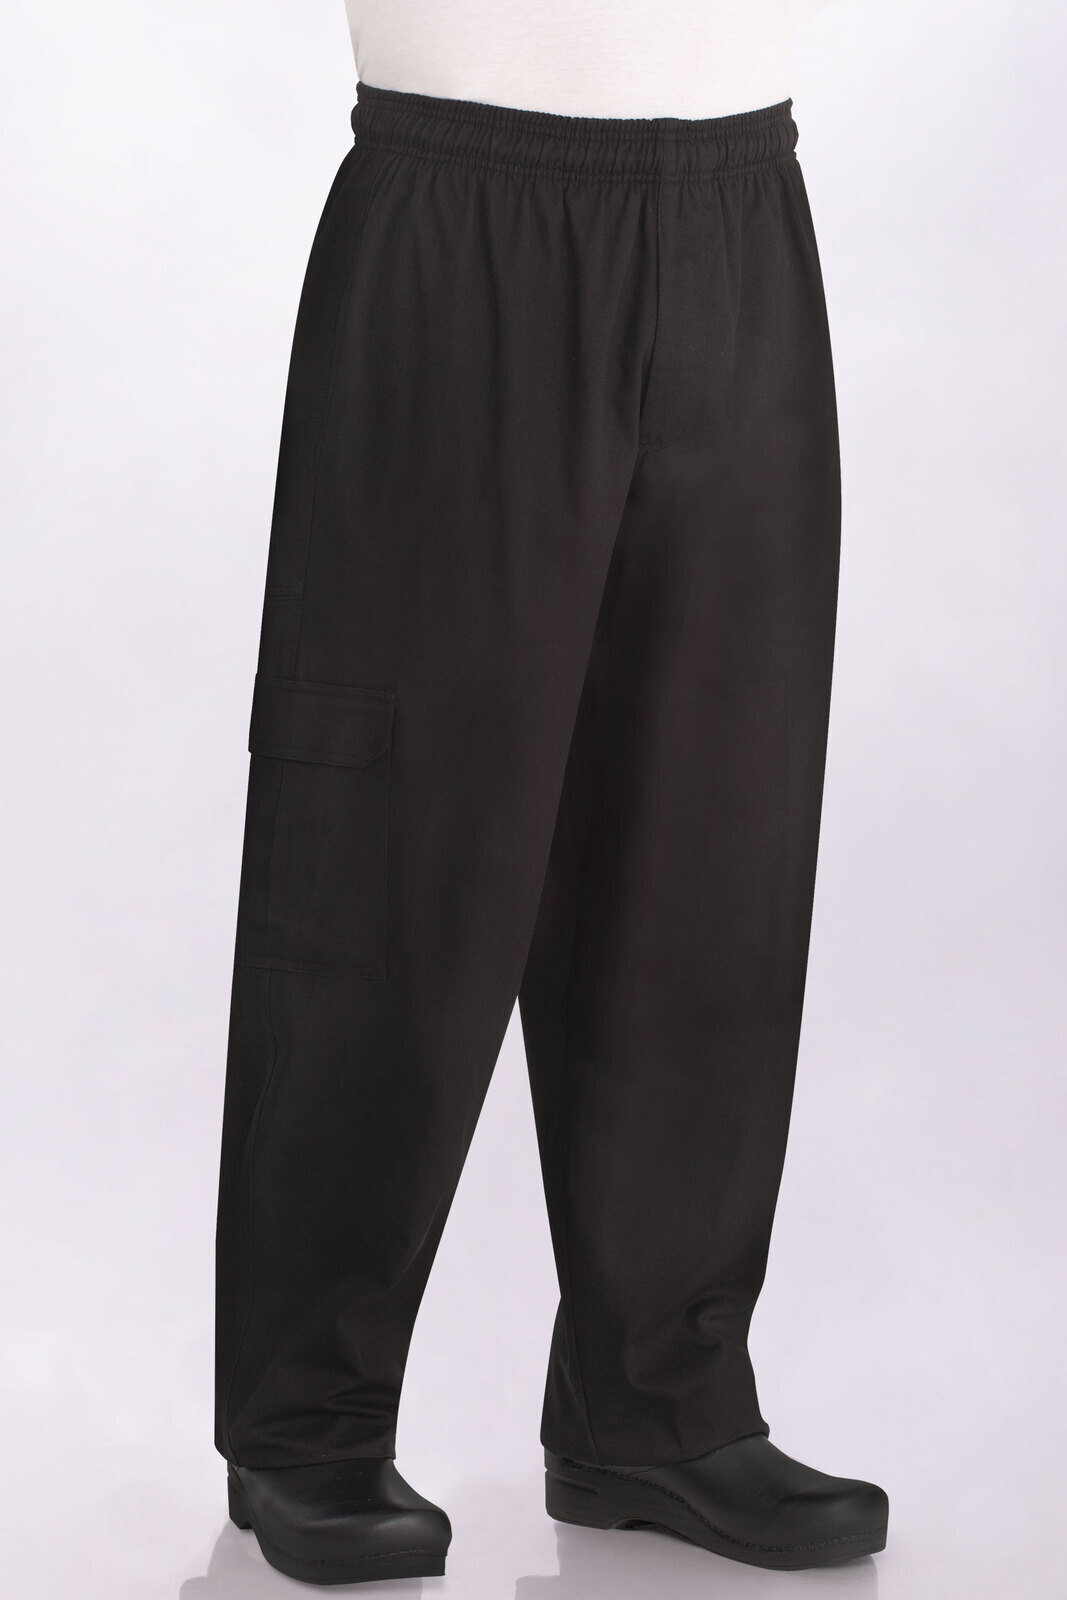 Chef Works Black Cargo Chef Pant - CPBL